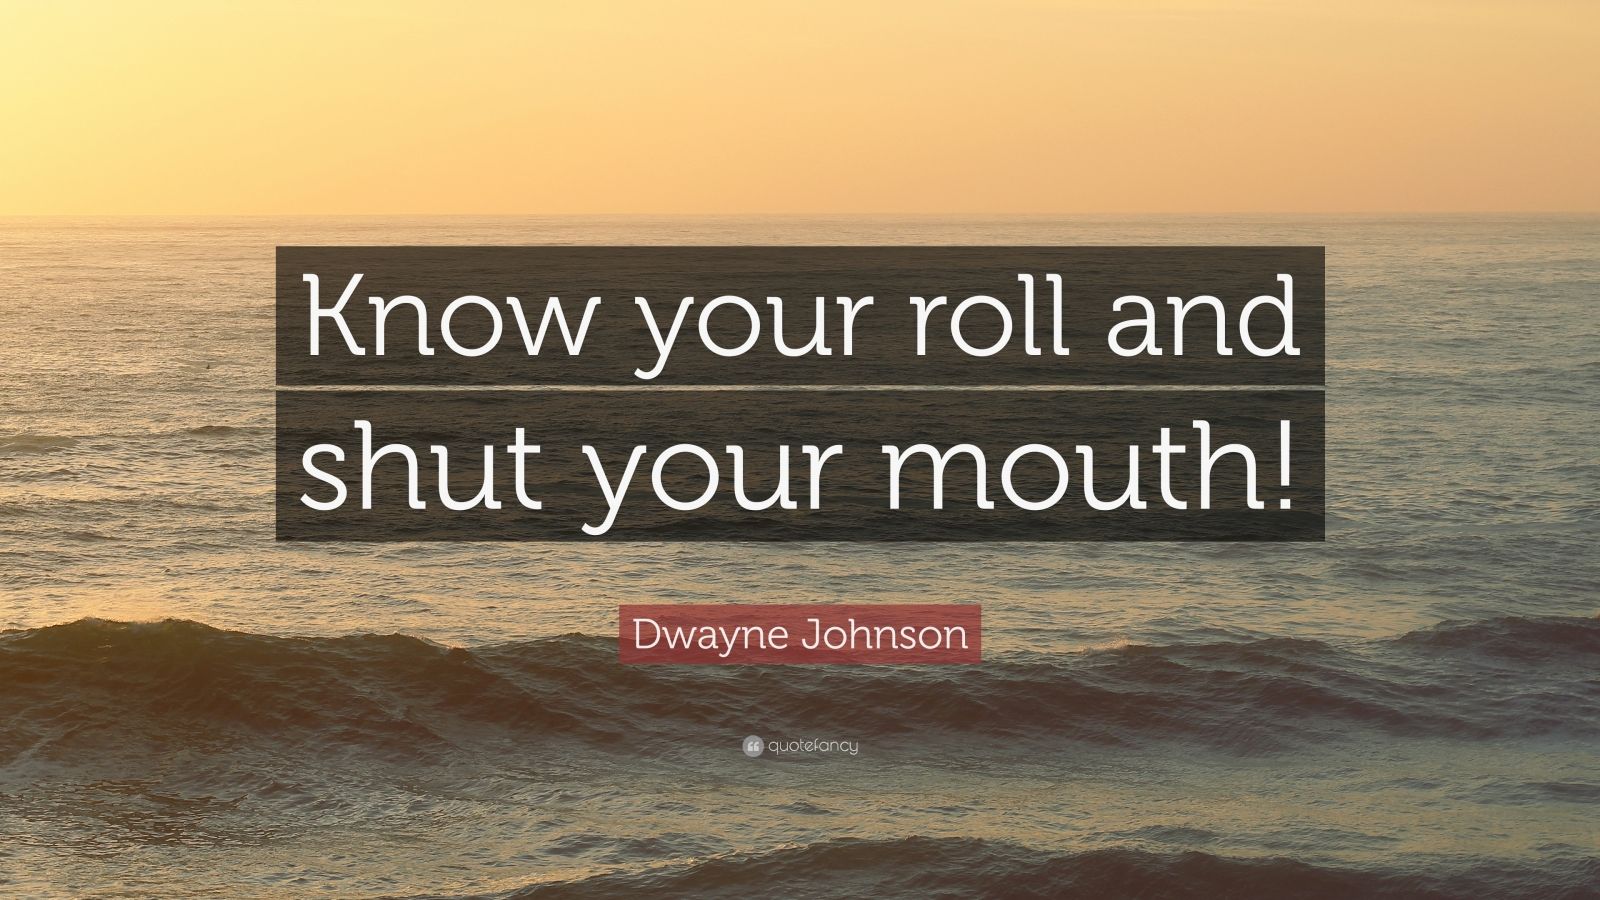 Dwayne Johnson Quote “know Your Roll And Shut Your Mouth” 7 Wallpapers Quotefancy